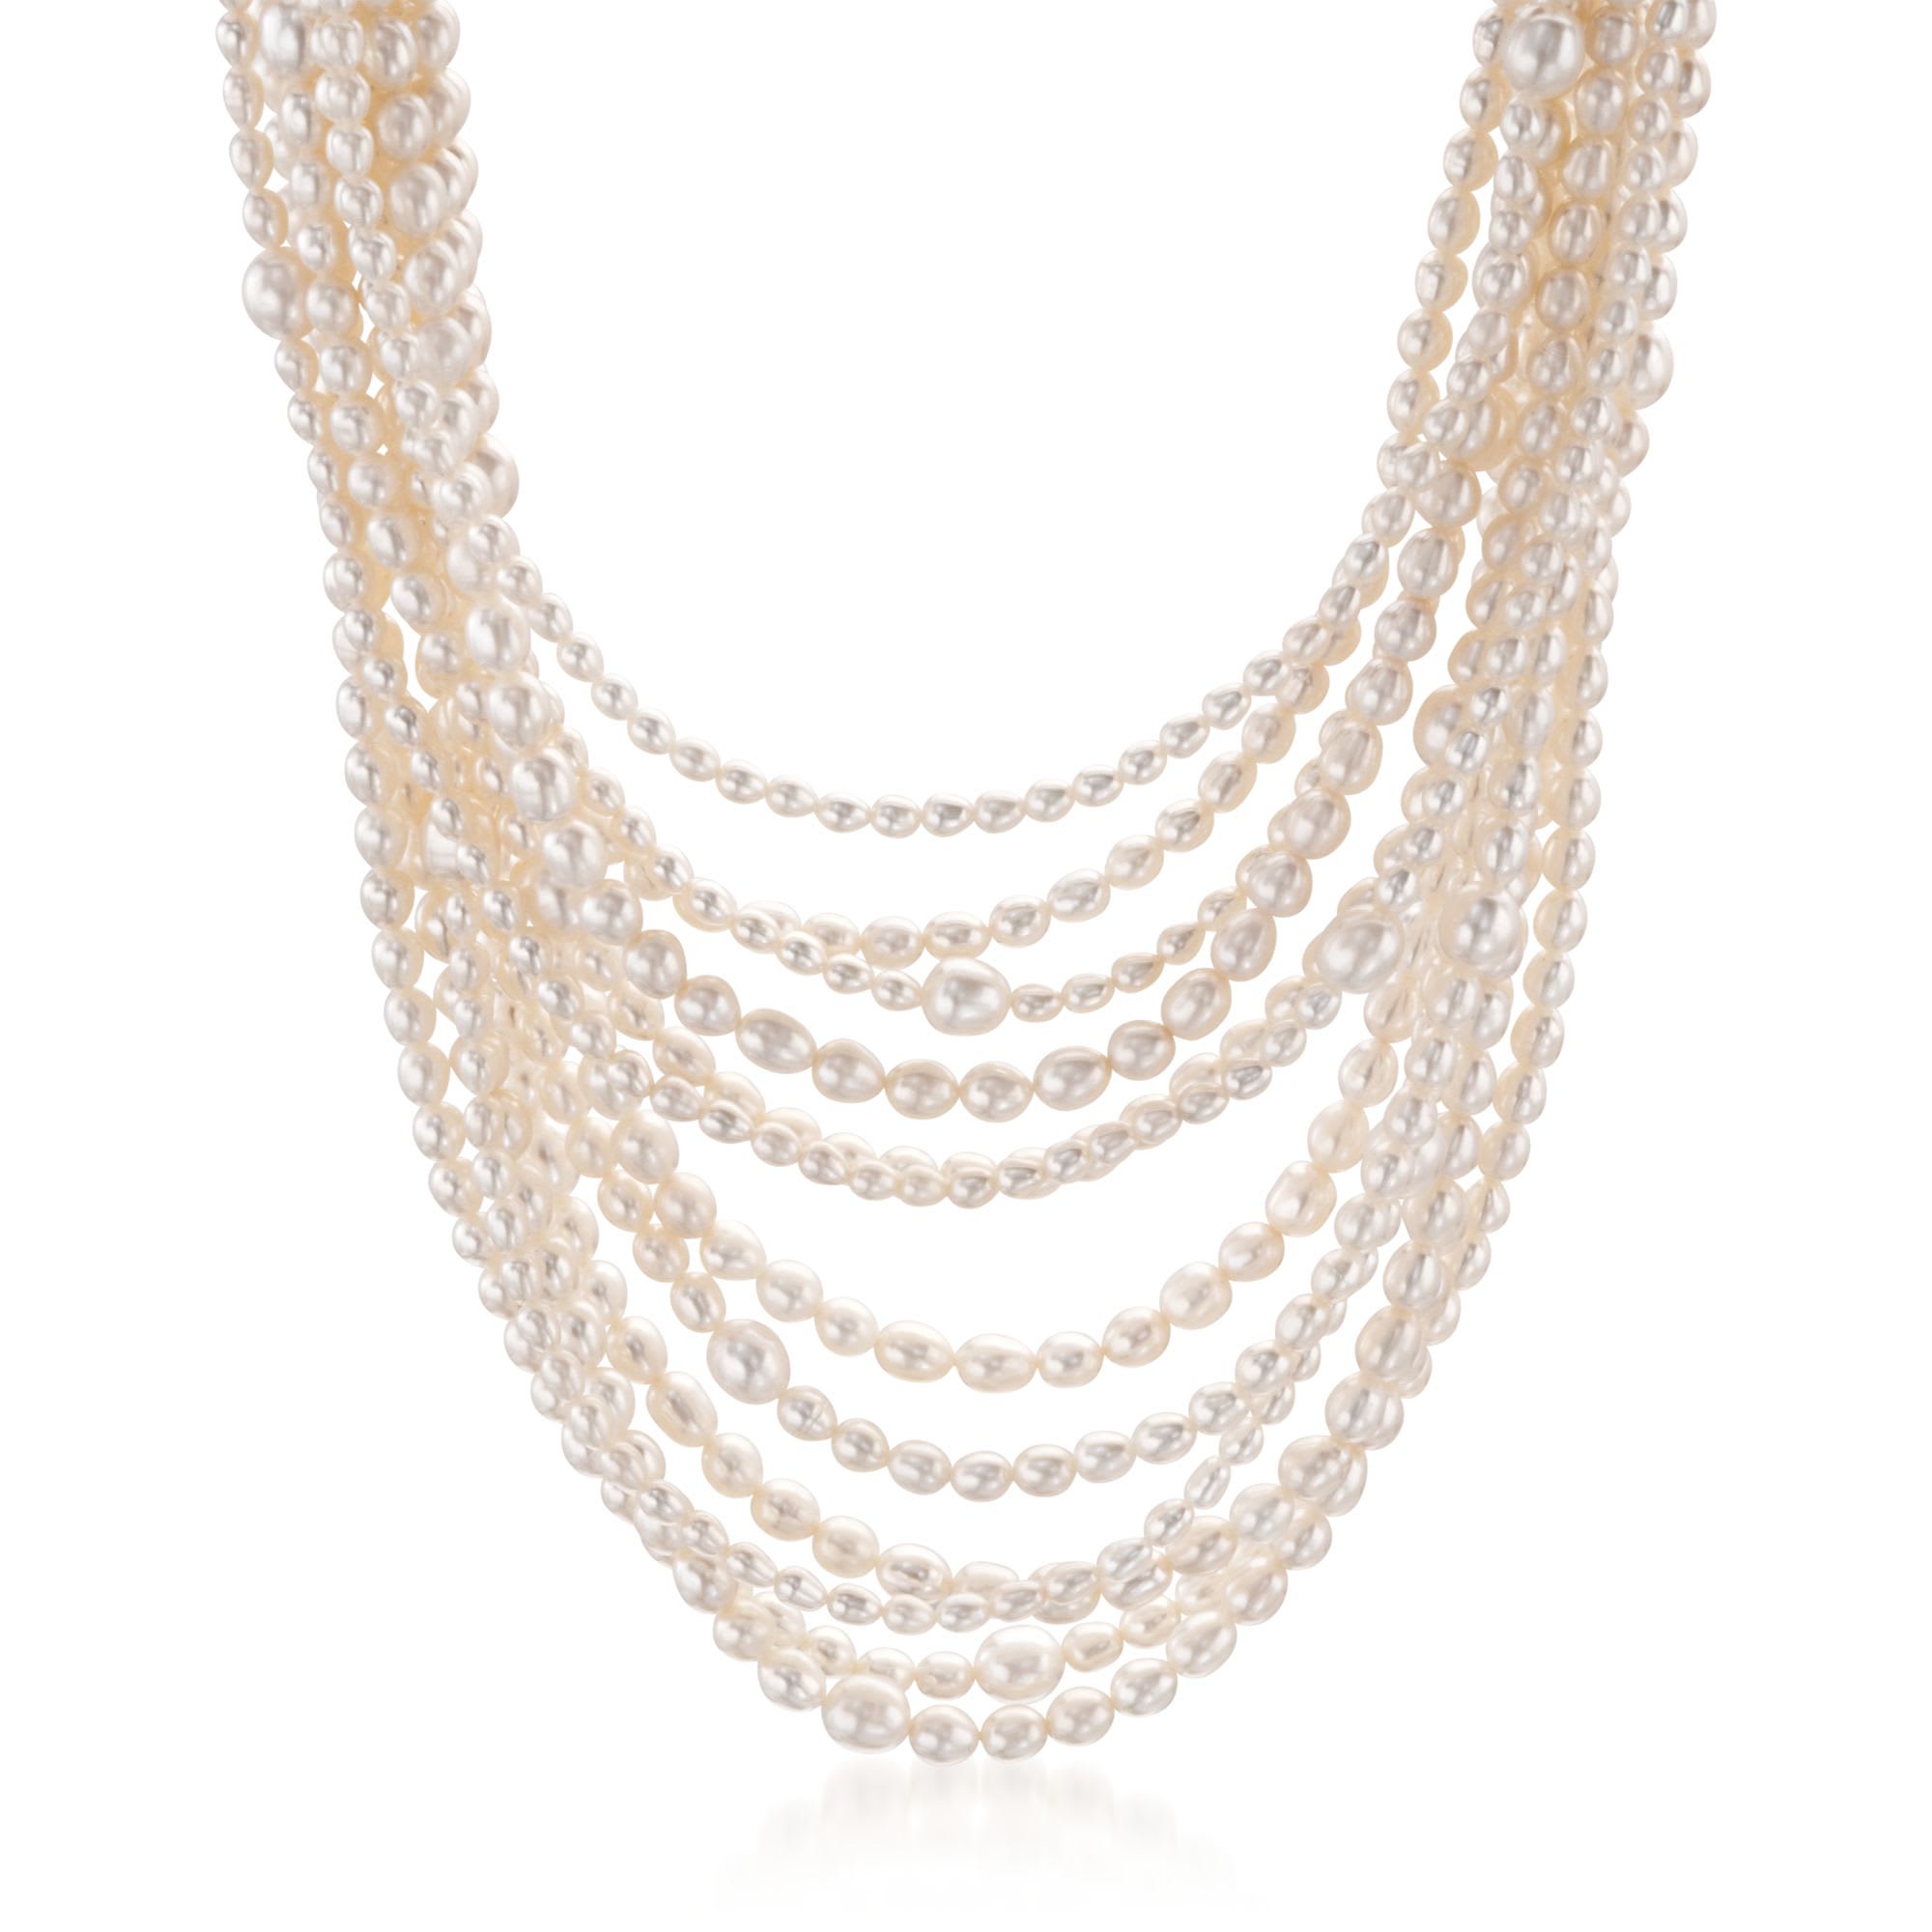  Sterling Silver White Freshwater Cultured A Quality Pearl  Necklace (8.5-9mm), 18: Pearl Strands: Clothing, Shoes & Jewelry